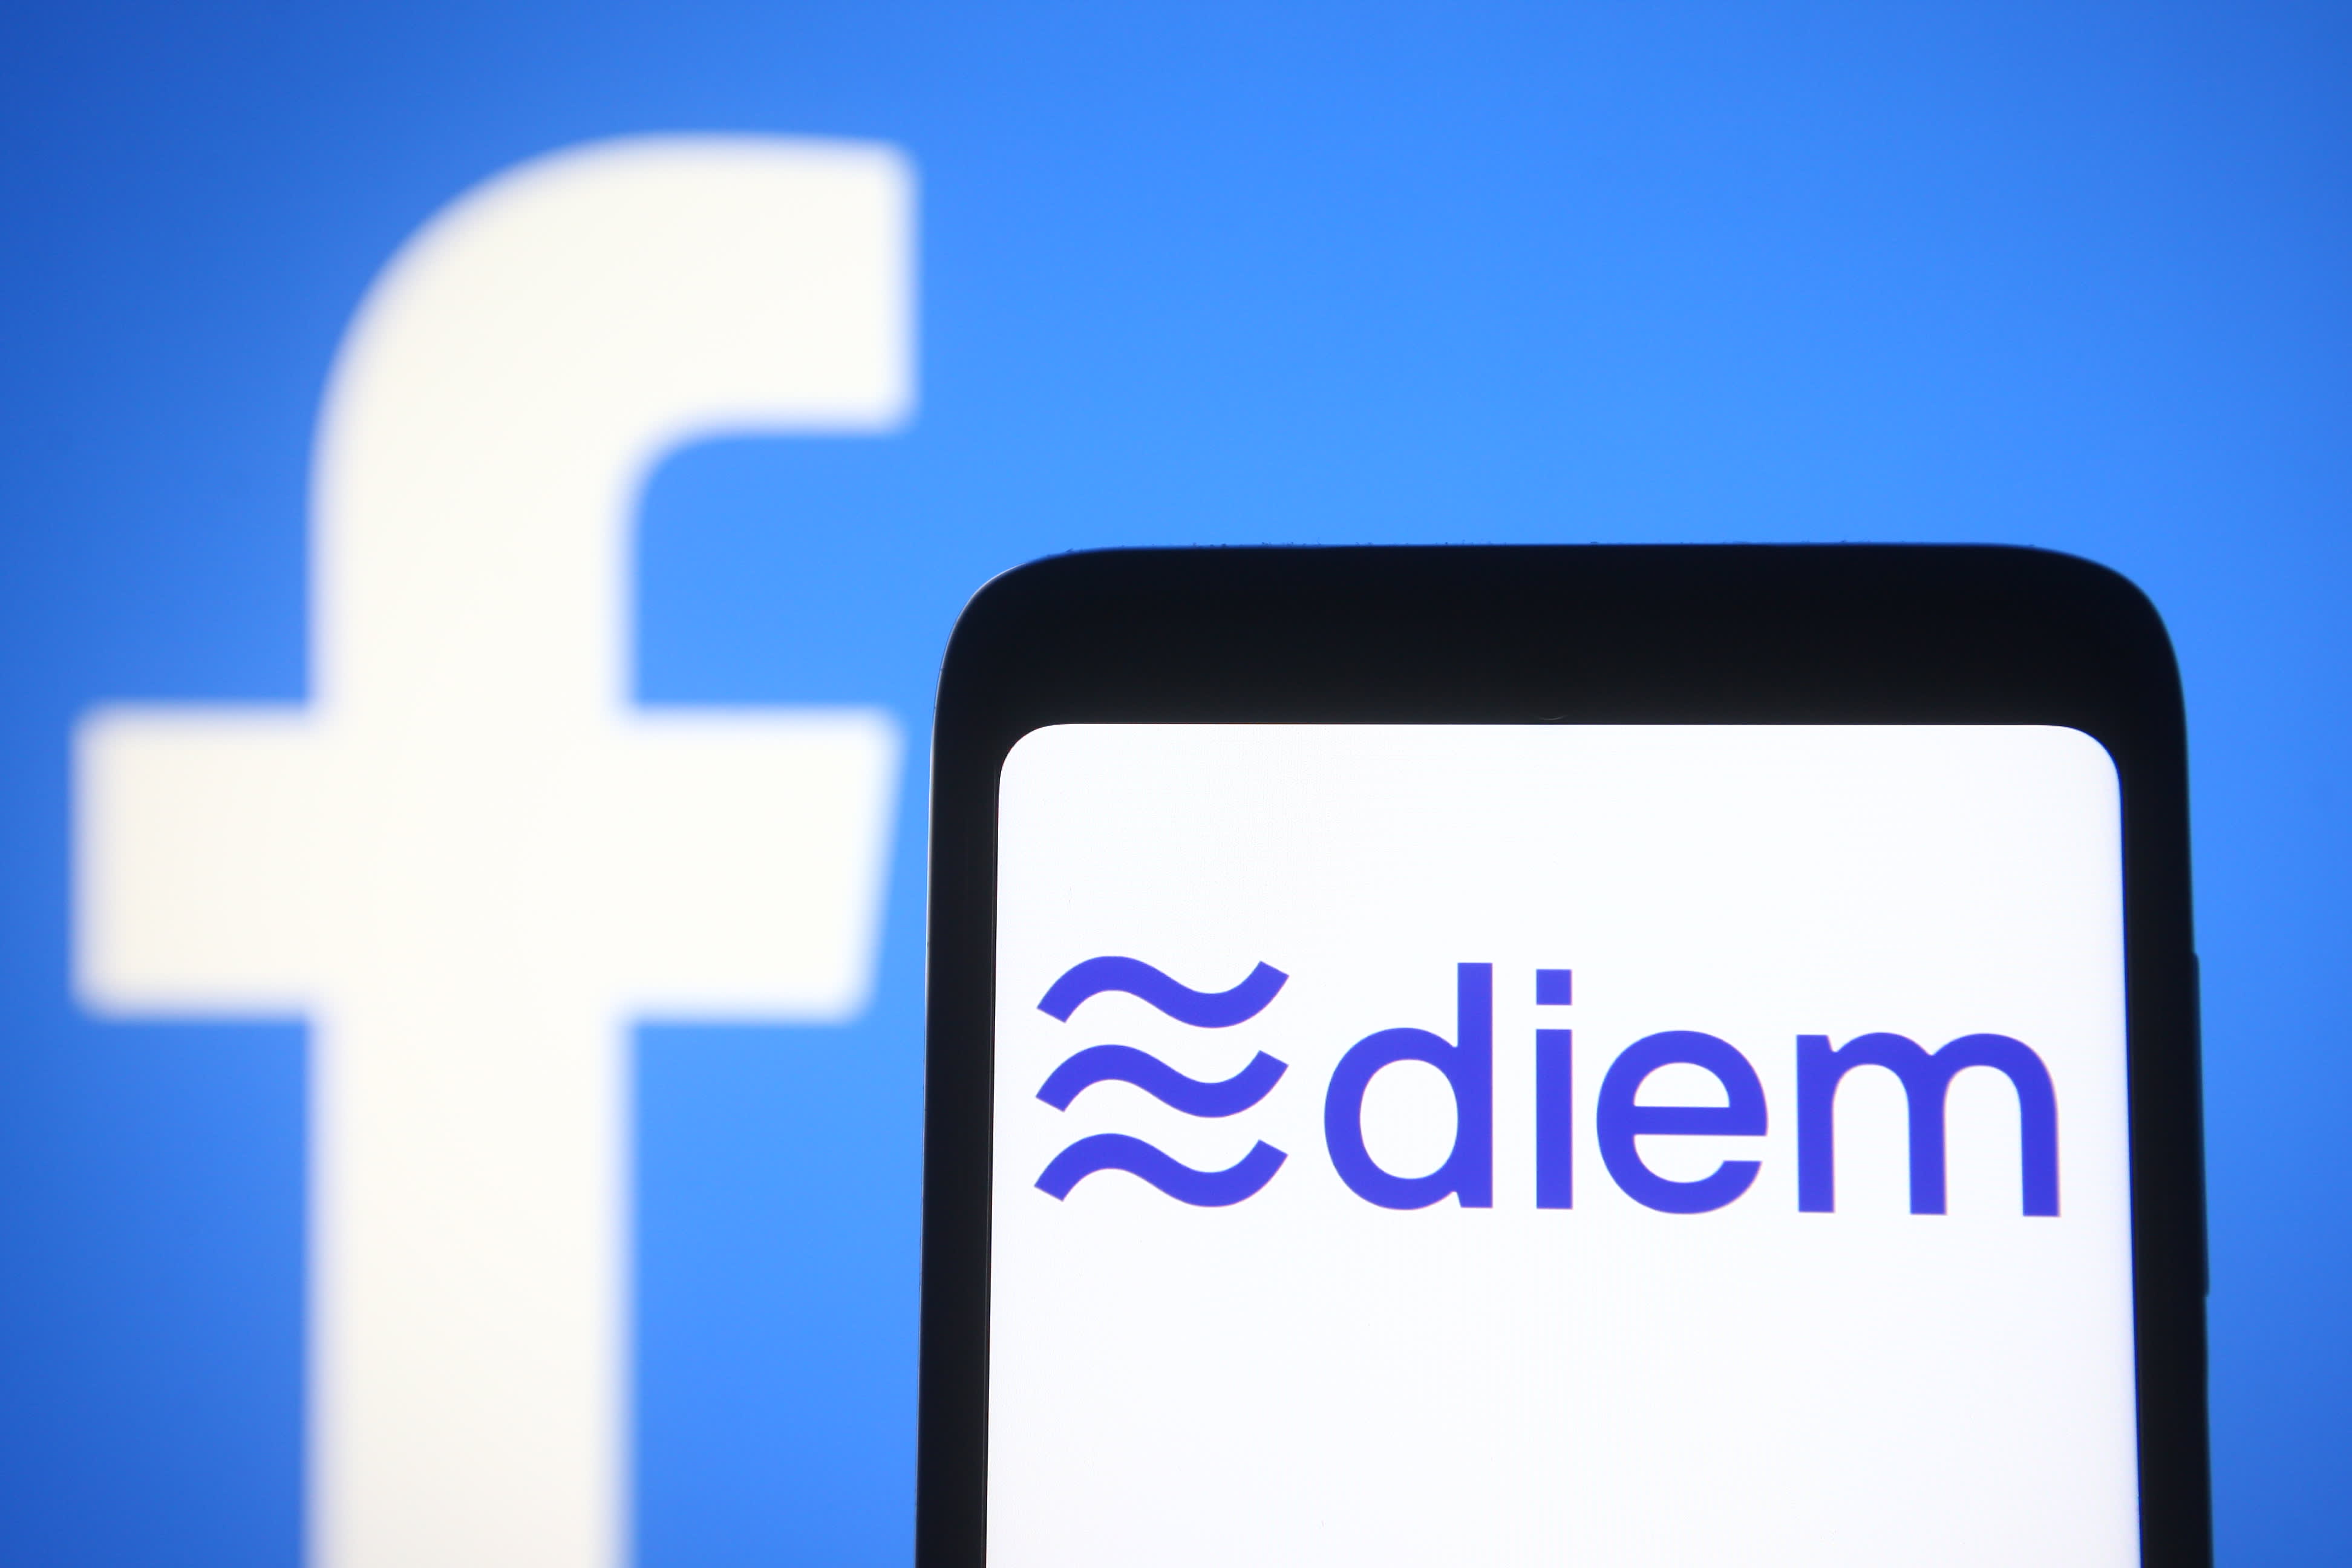 Facebook-backed Diem is moving from Switzerland to the US